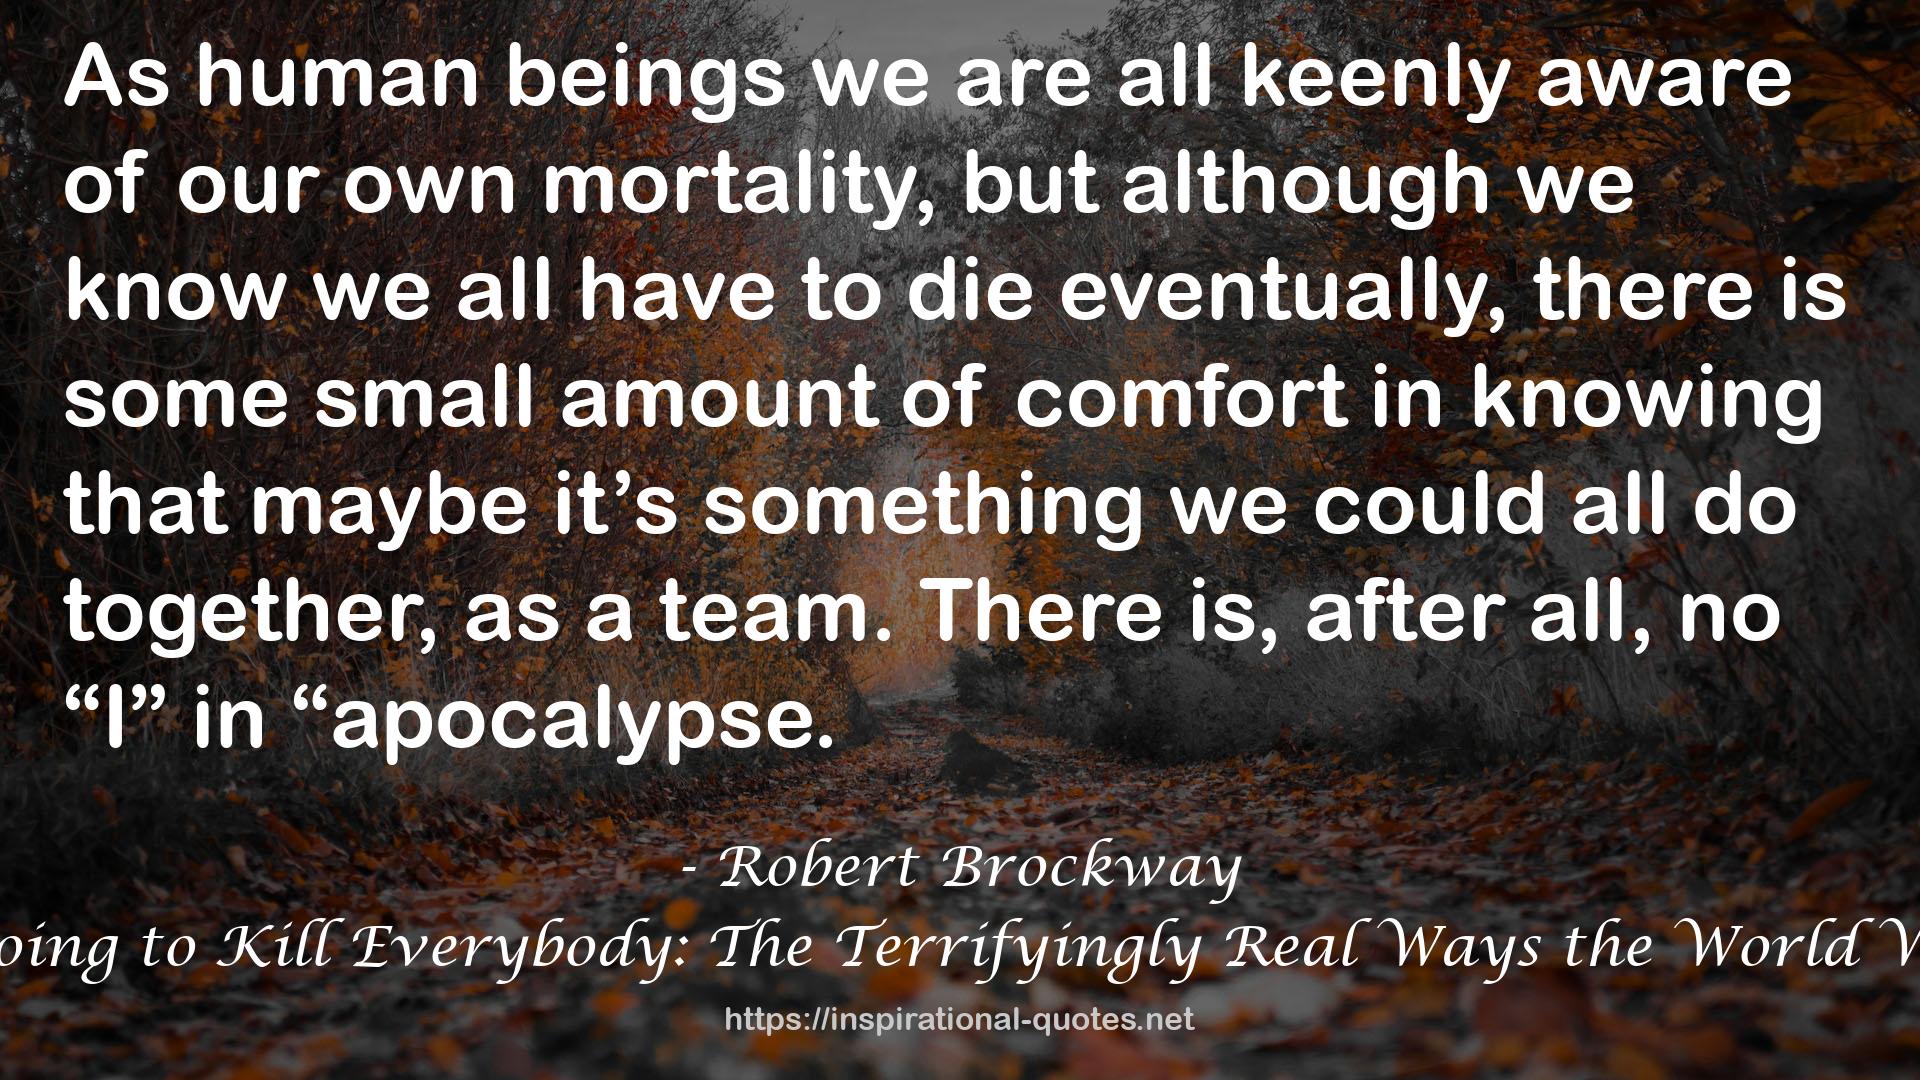 Everything Is Going to Kill Everybody: The Terrifyingly Real Ways the World Wants You Dead QUOTES